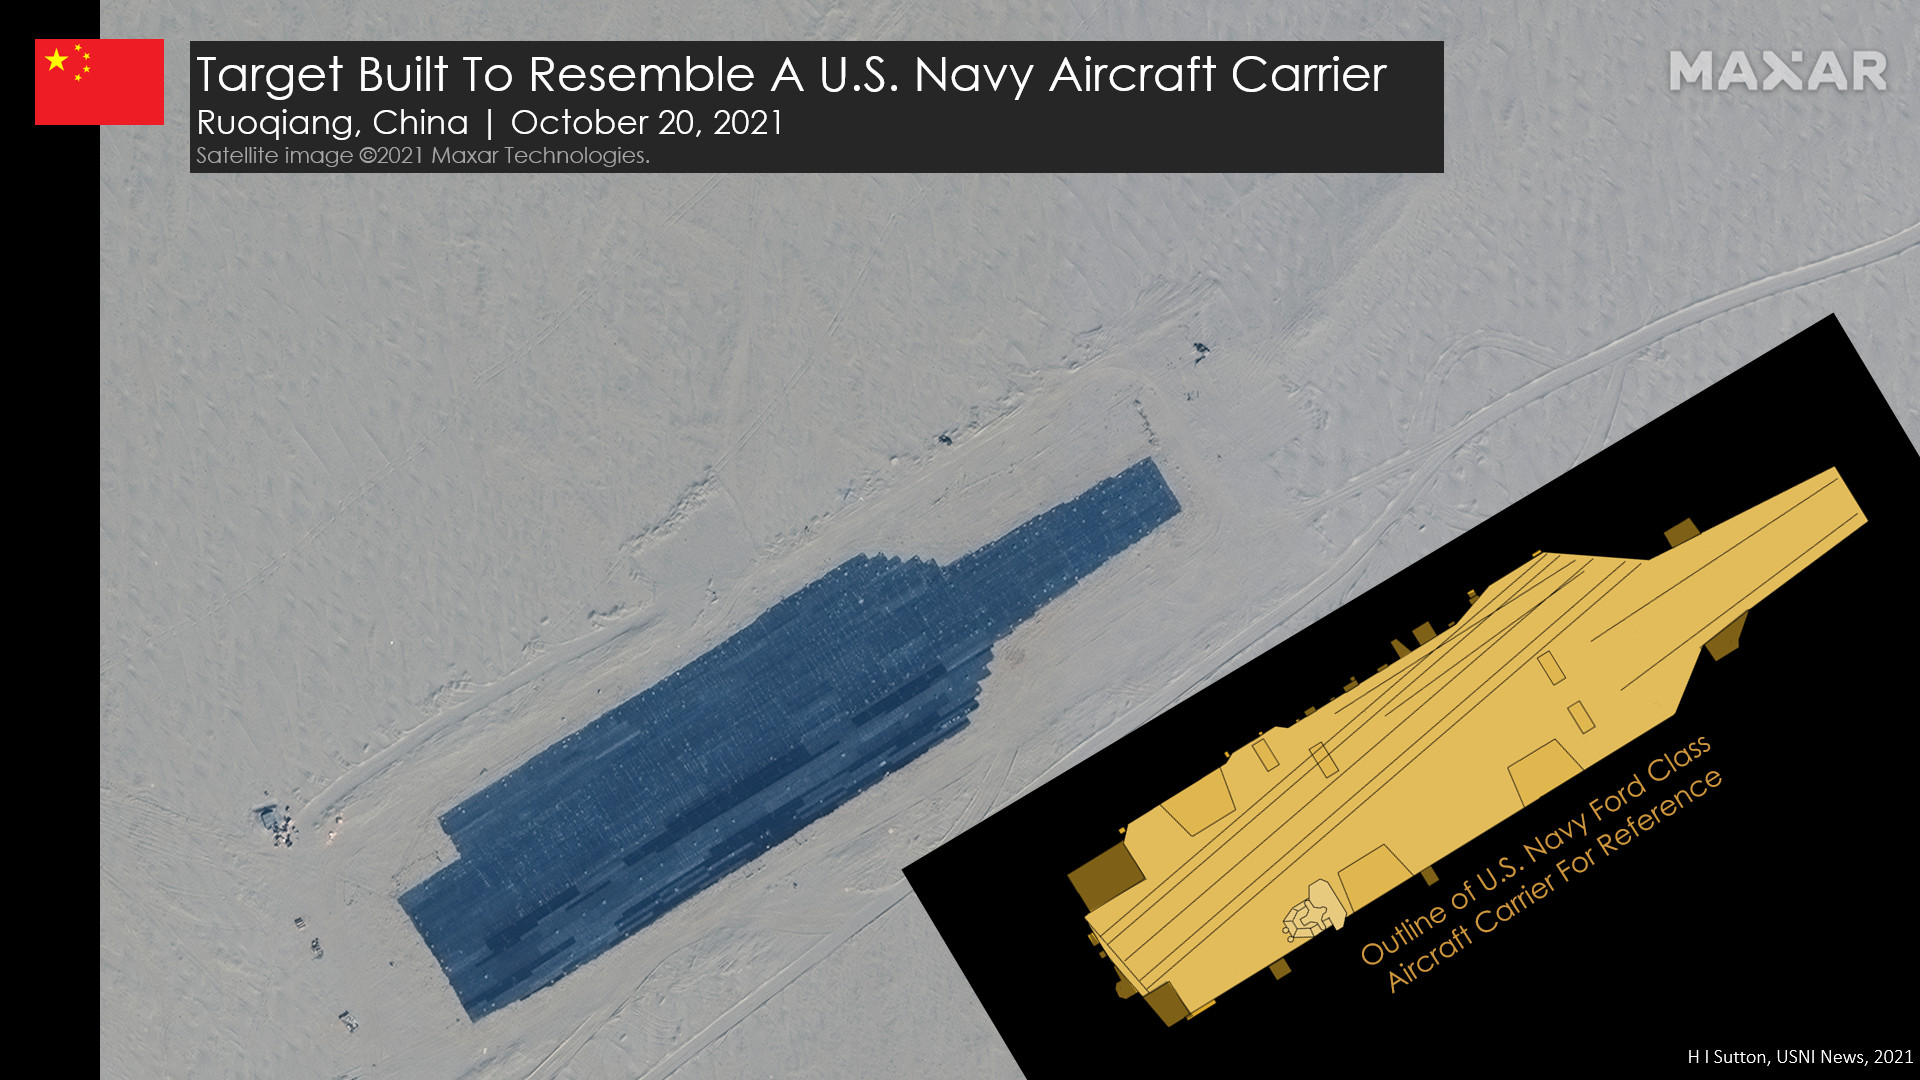 satellite image of a target in the shape of a U.S. aircraft carrier 